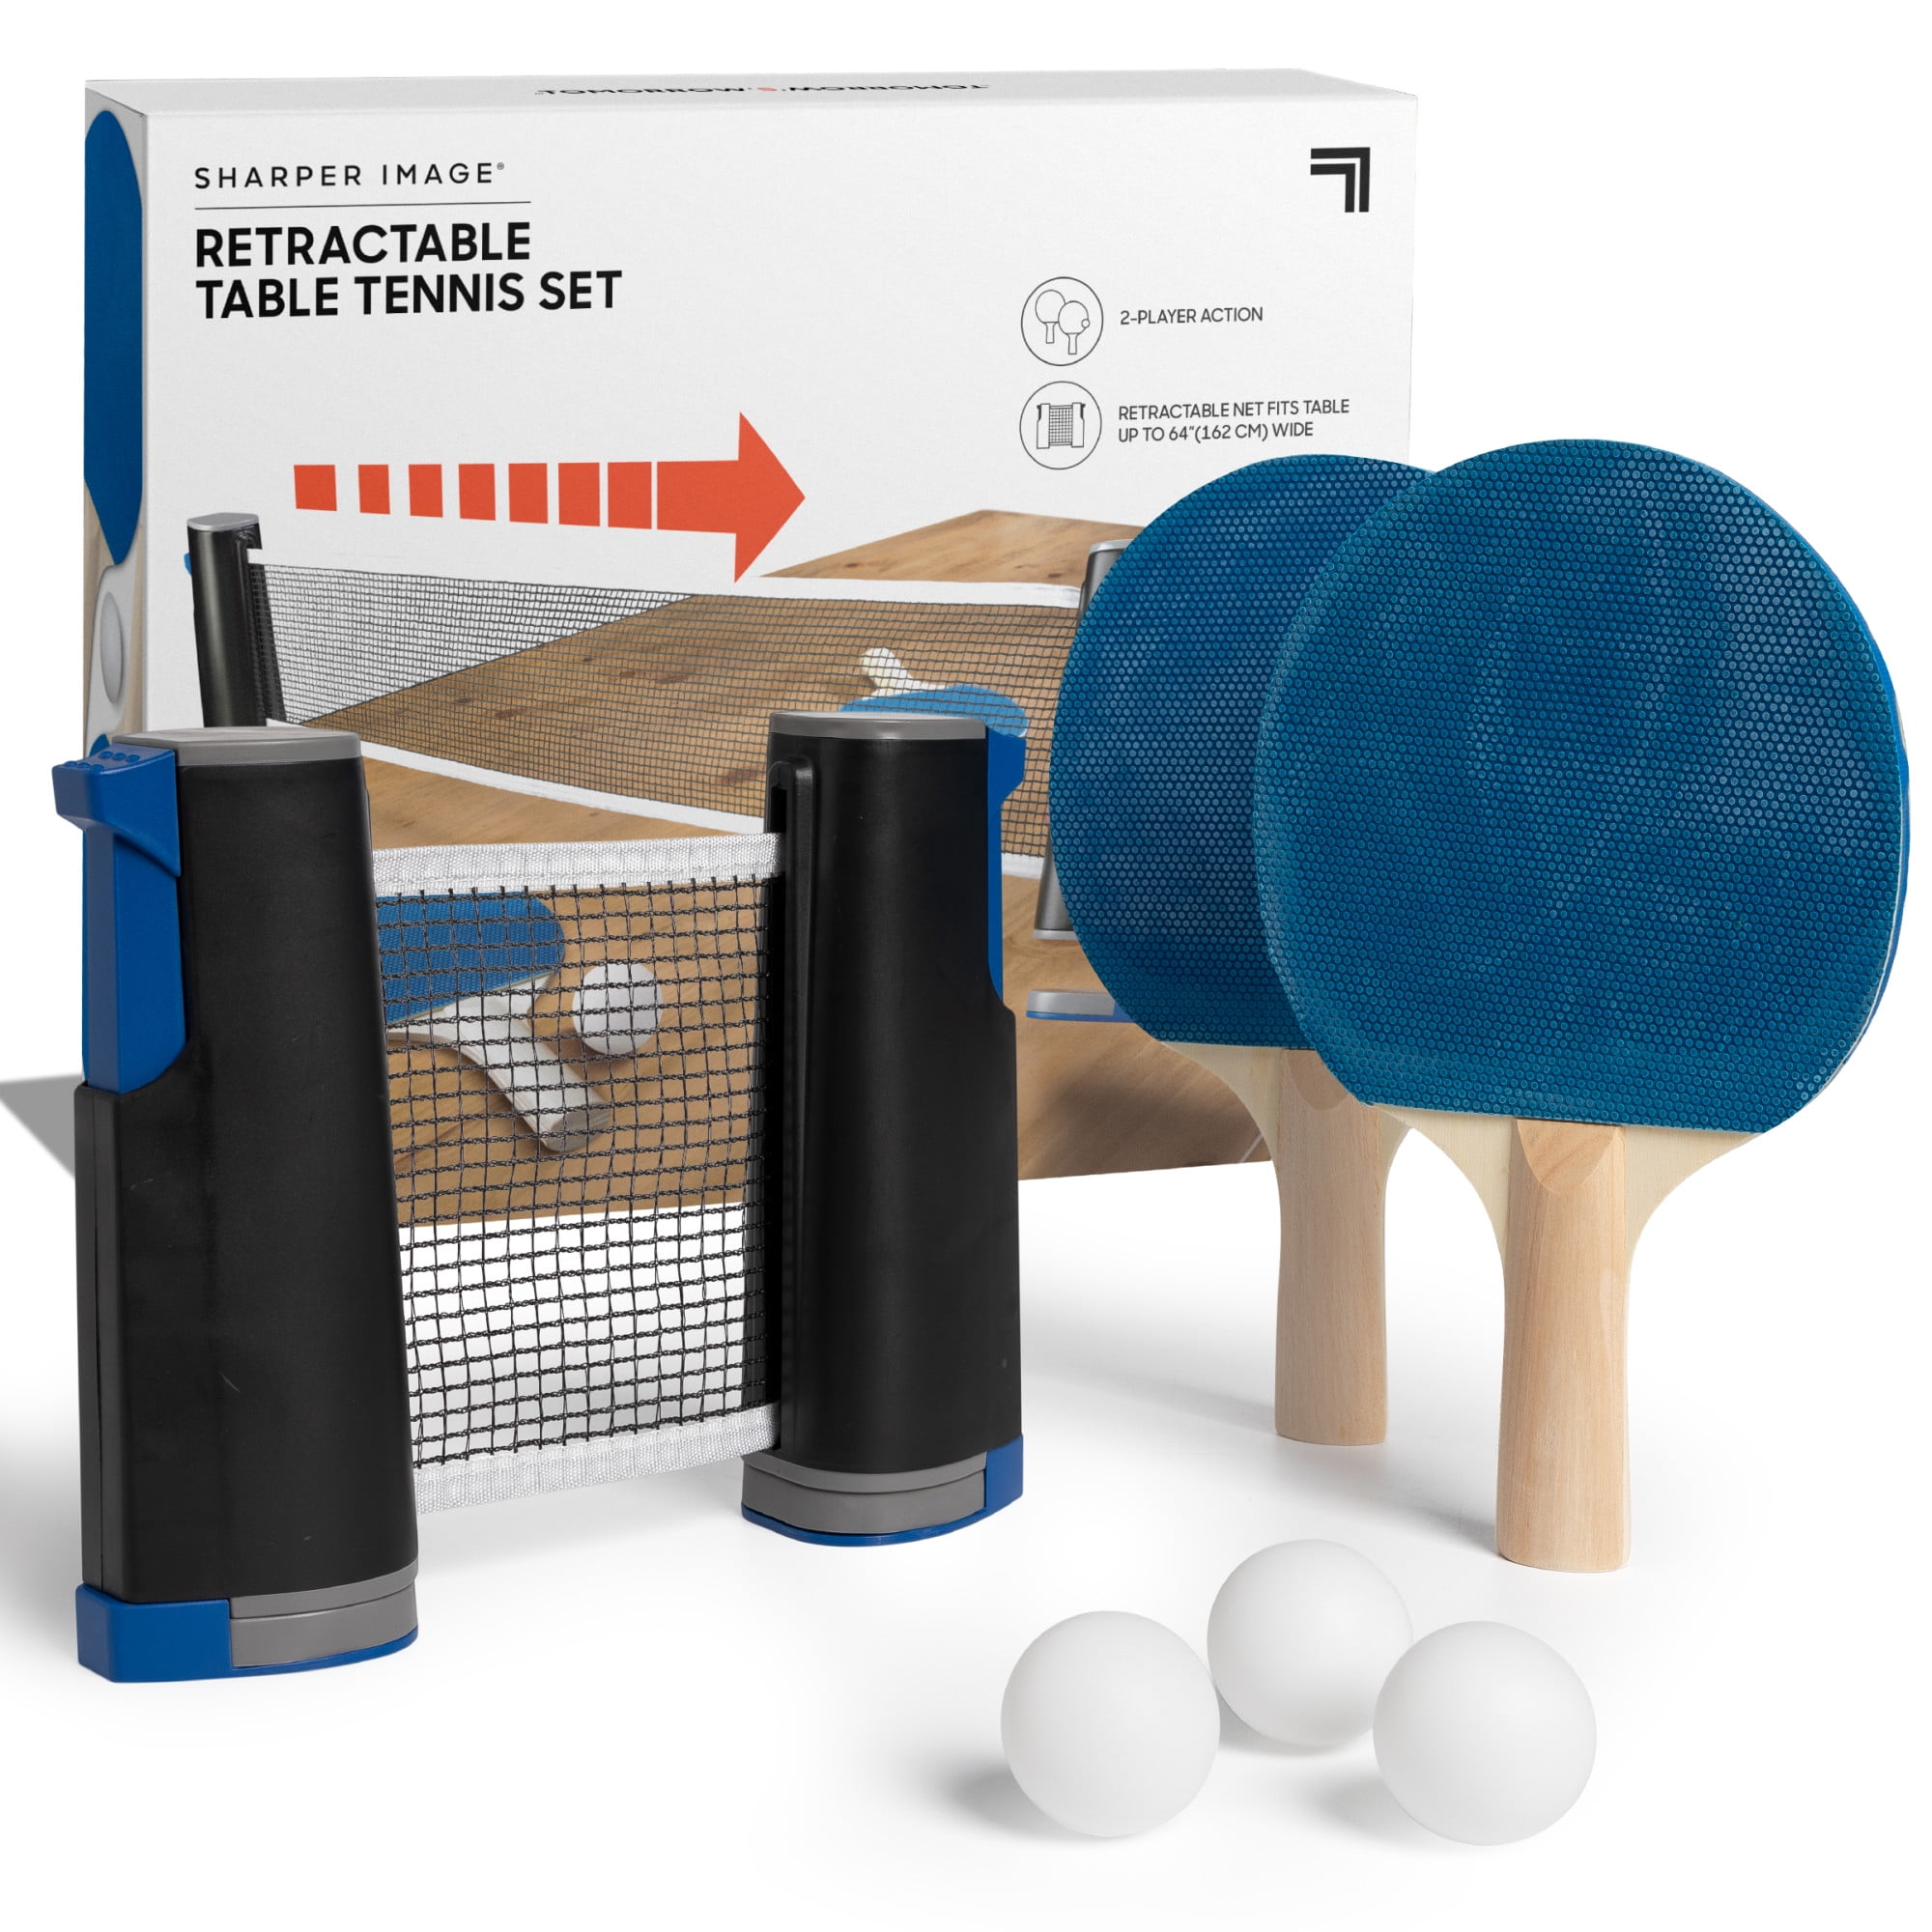 Play Almost Anywhere with Expandable Net BOOMSTORE Sharper Image 7-Piece Retractable Tabletop Tennis Game Set Includes Convenient Portable Drawstring Bag 2 Paddles and 3 Balls 